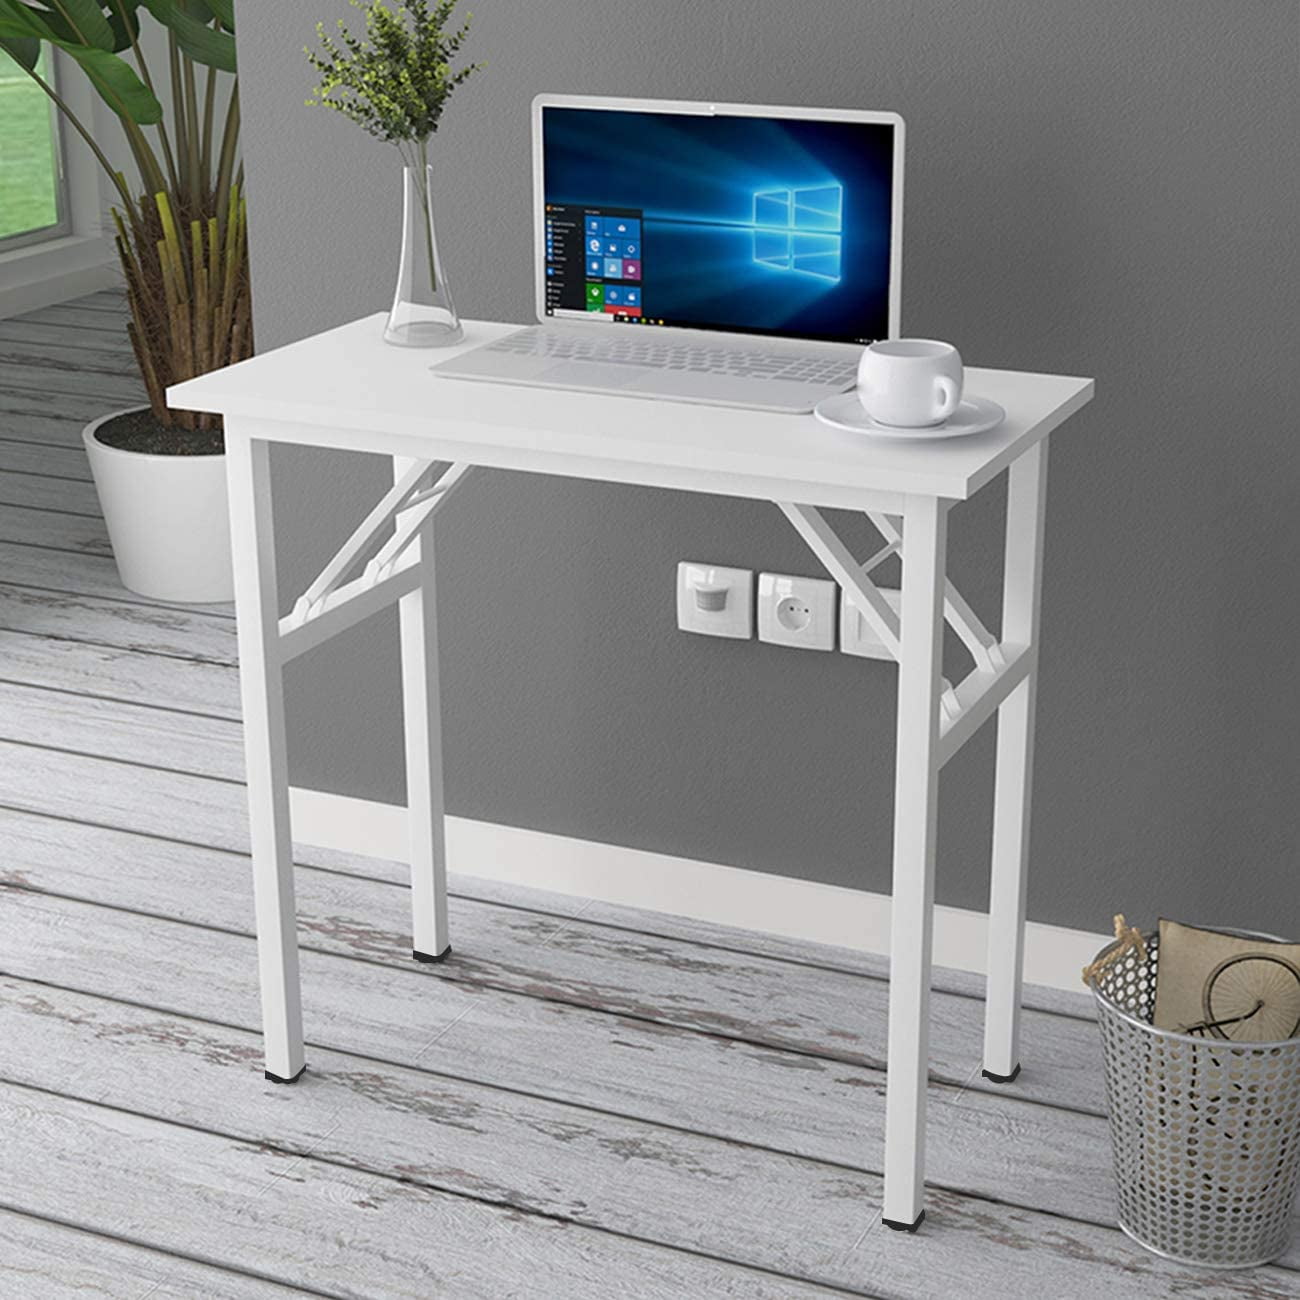 SOFSYS Modern Folding Desk for Small Space, Computer Gaming, Writing,  Student and Home Office Organization, Industrial Metal Frame with Premium